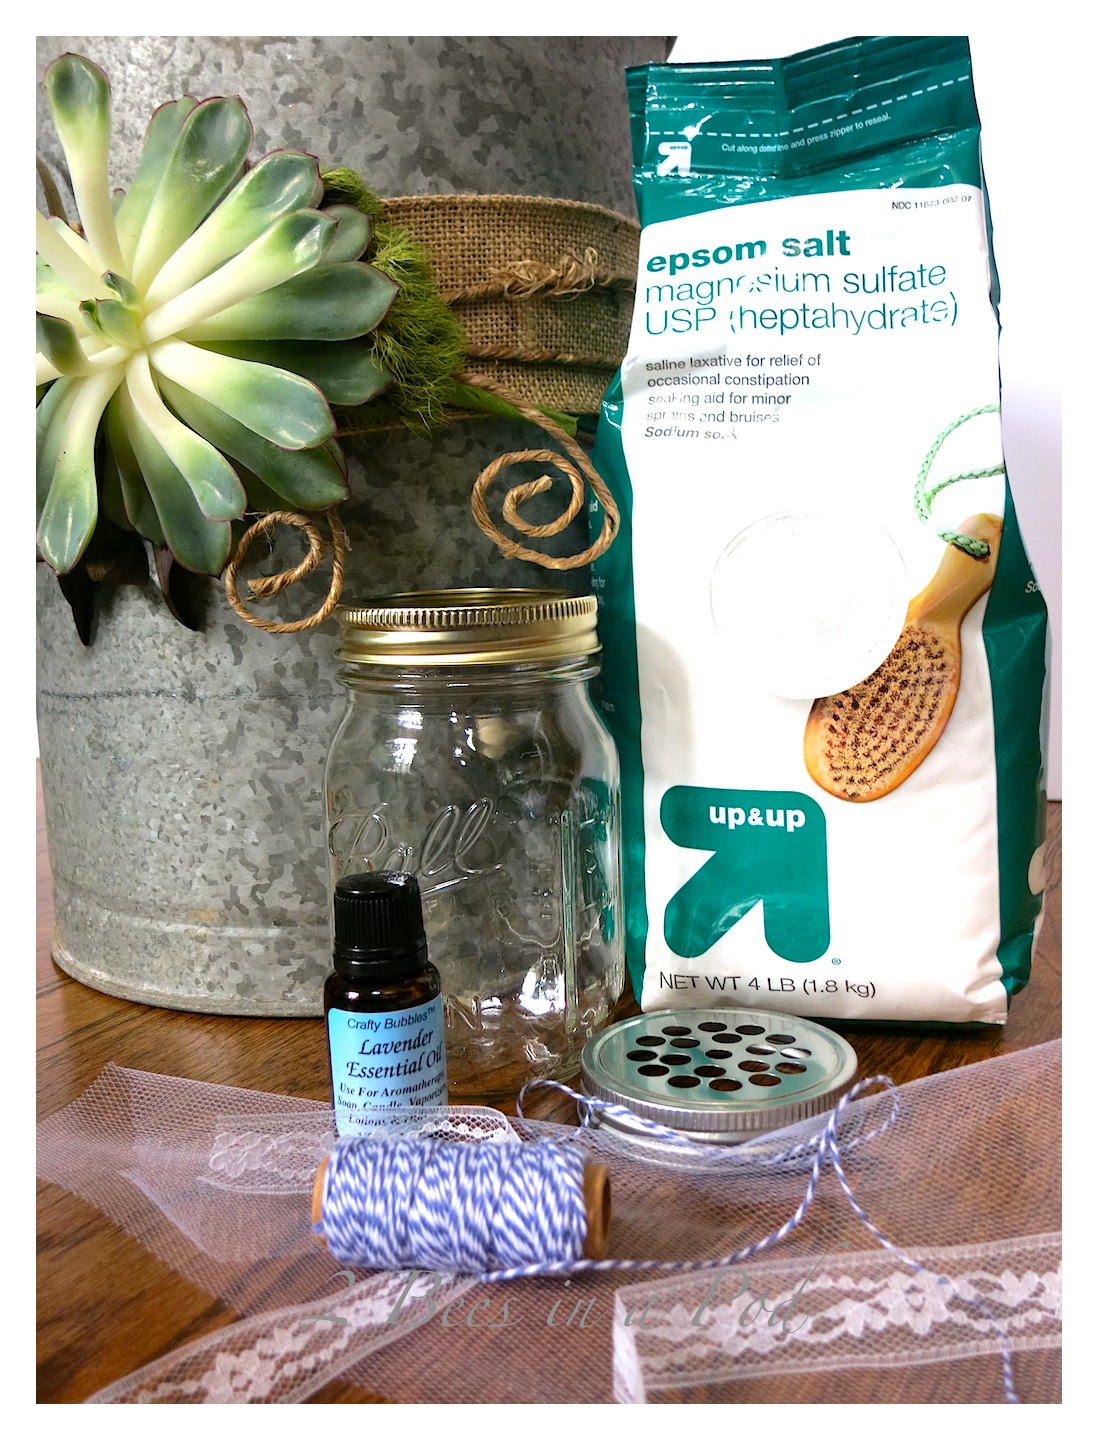 Lavender Bath Salts -Christmas Gift -  perfect gift for teacher, hostess or friend. Fragrant and healthy - Epsom salt and fresh, dried lavender buds.